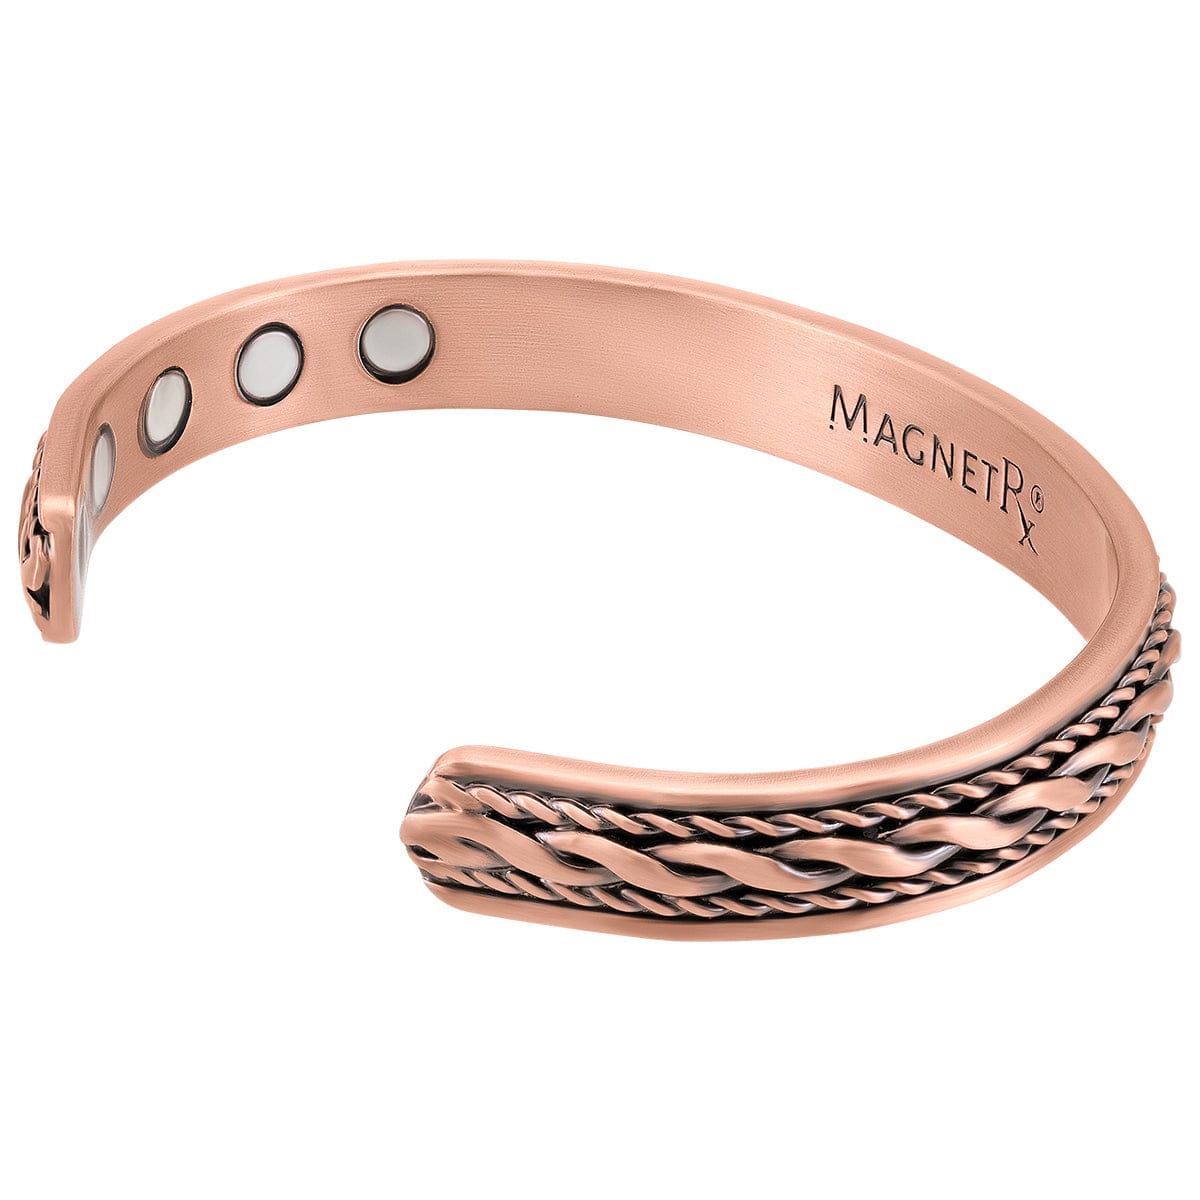 Magnetic Bracelet Women’s Inlay Copper wire Magnetic Therapy Bracelet Bangle MagnetRX